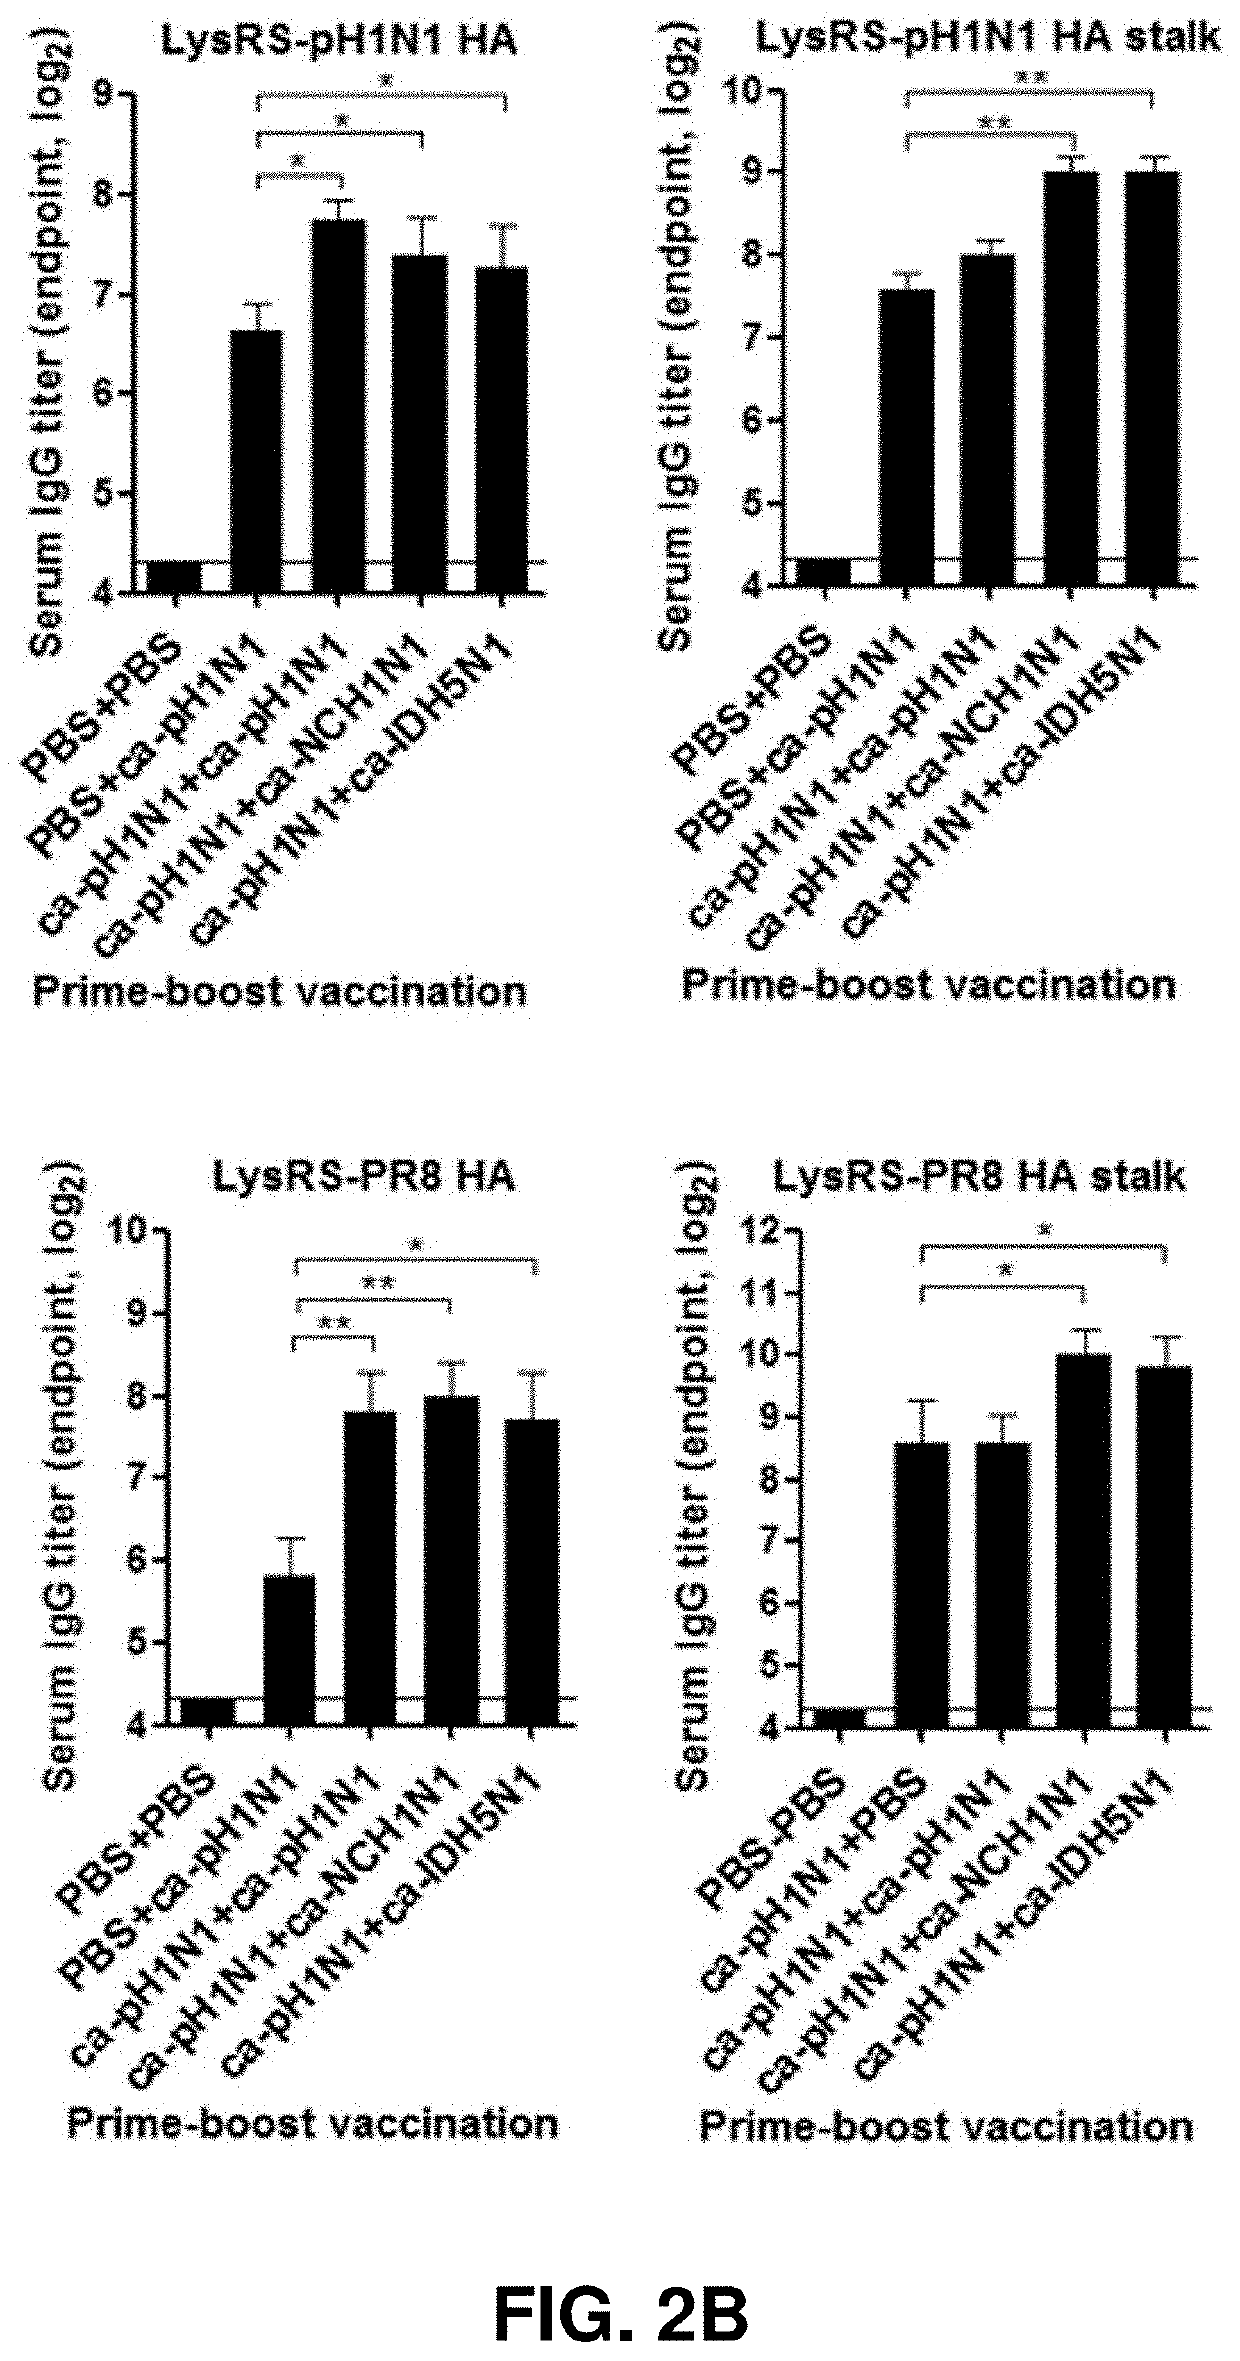 Universal influenza vaccine using cold-adapted live-attenuated virus